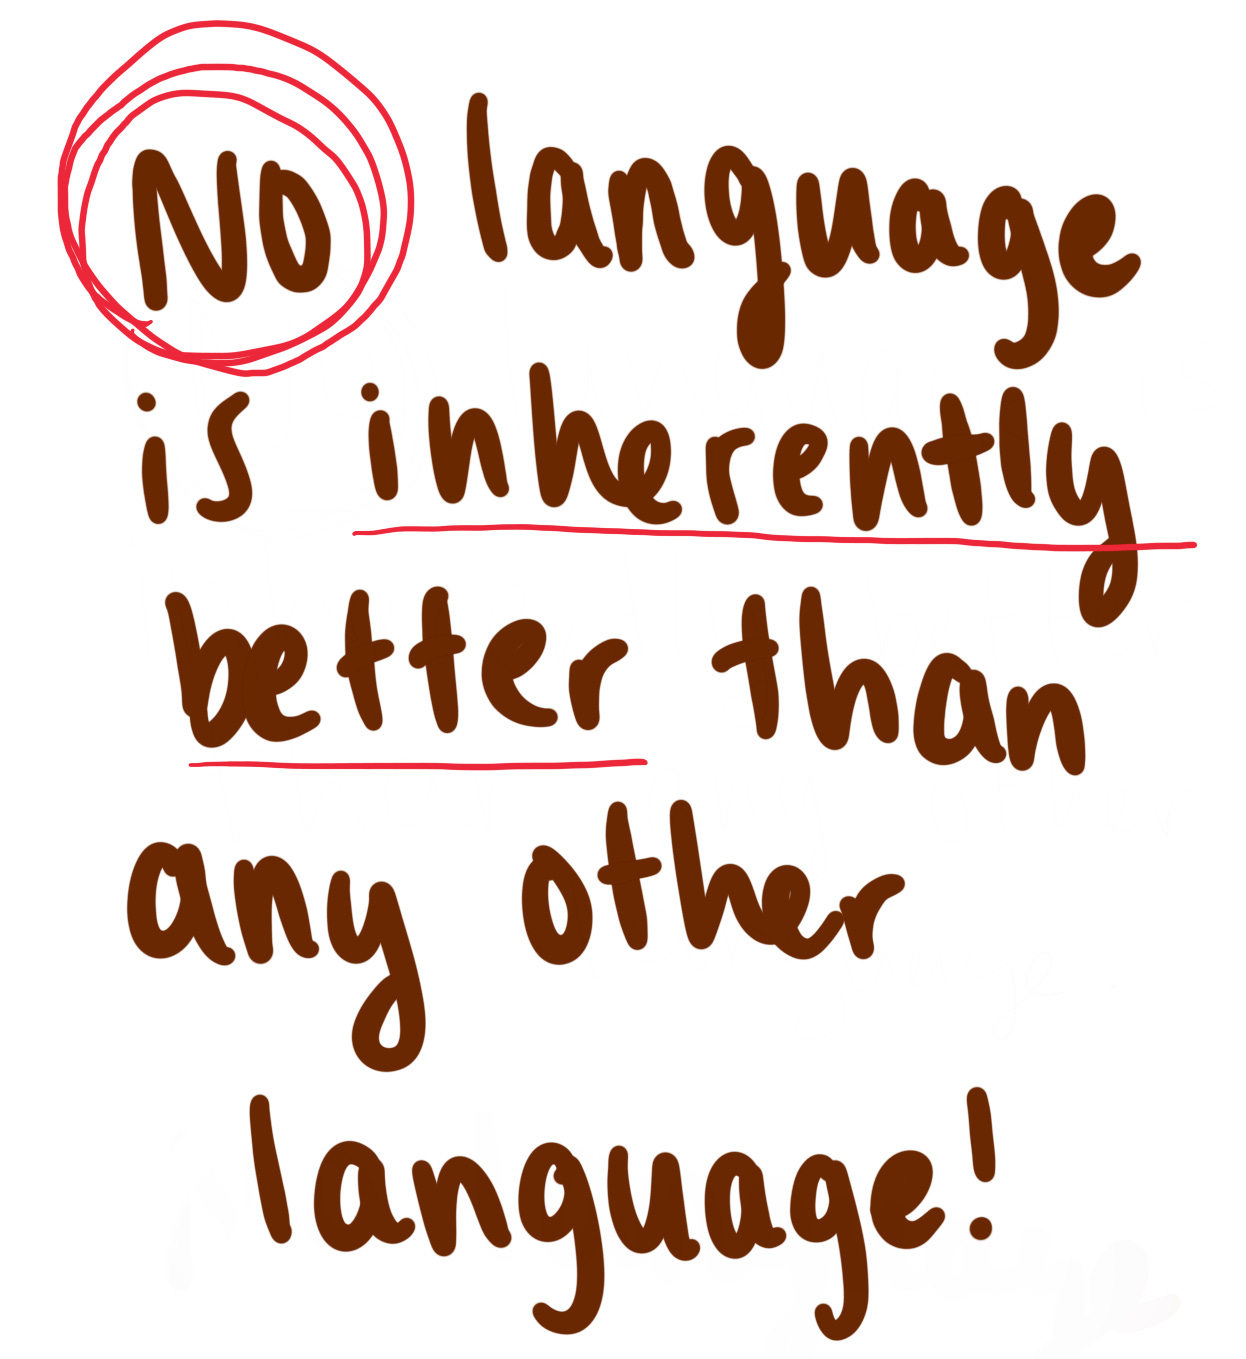 text says no language is inherently better than any other language.